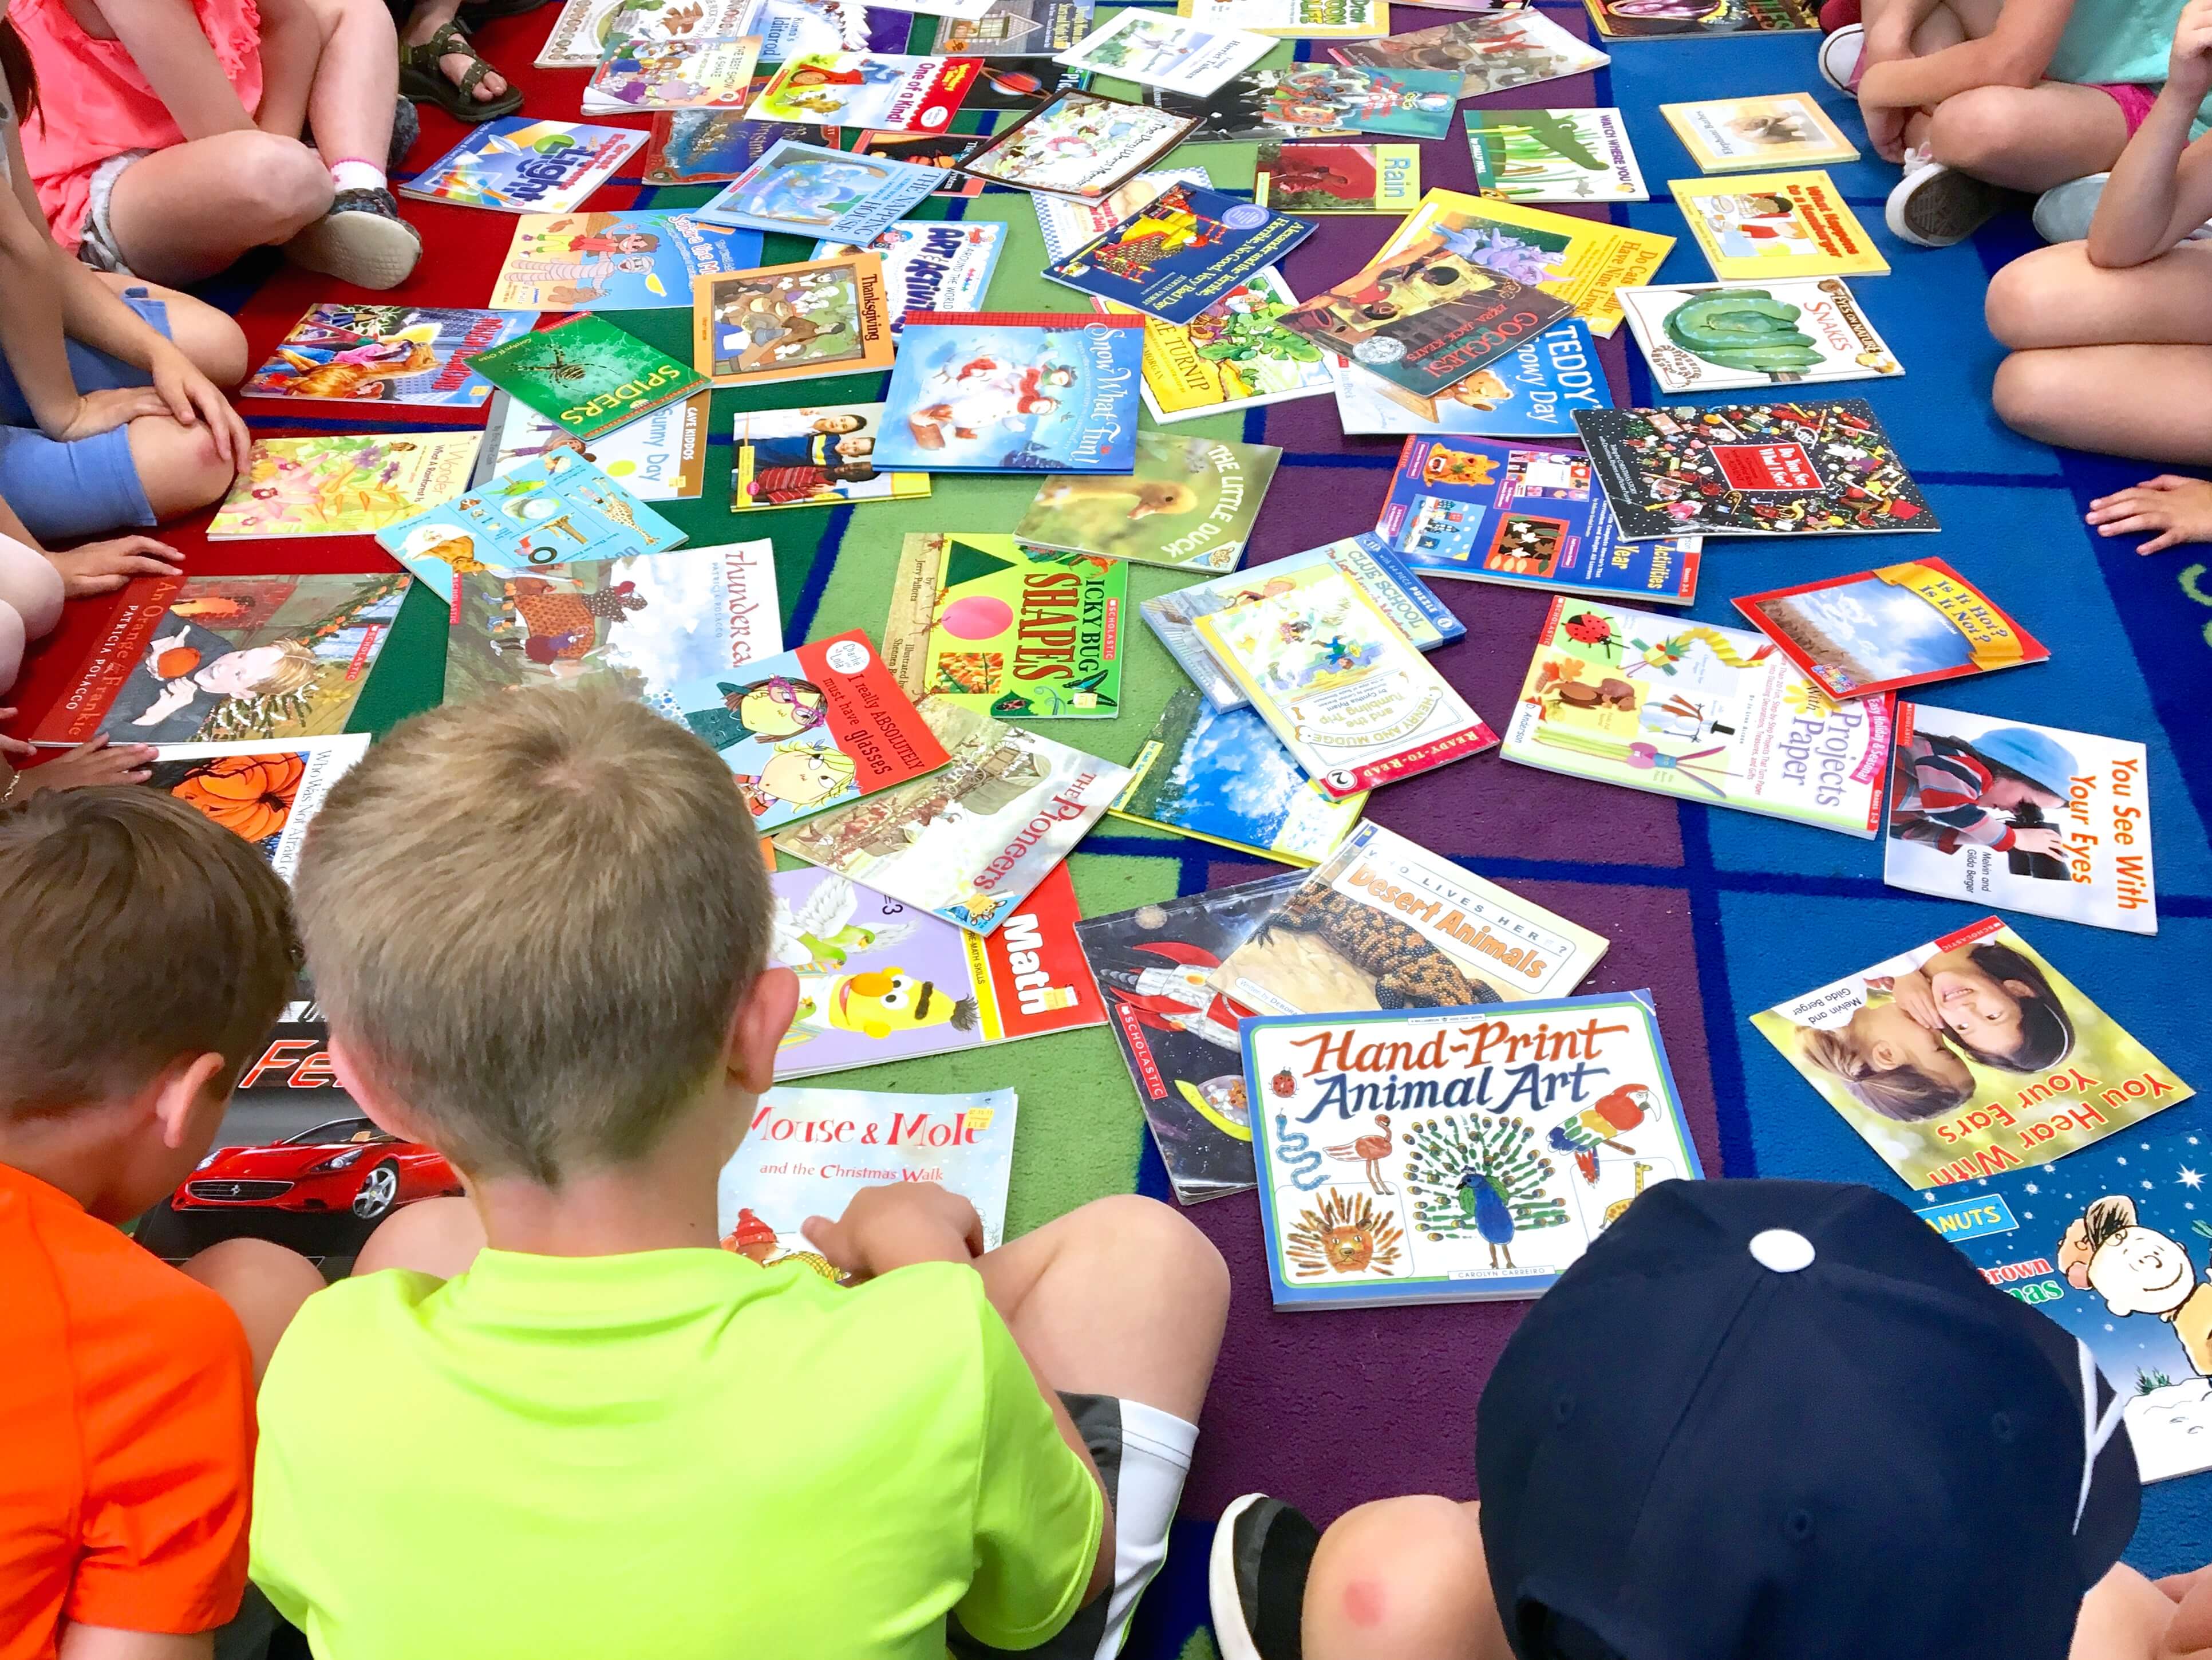 Snag hundreds of FREE picture and chapter books for your classroom library or student book bins from your local Half-Price Book Store.